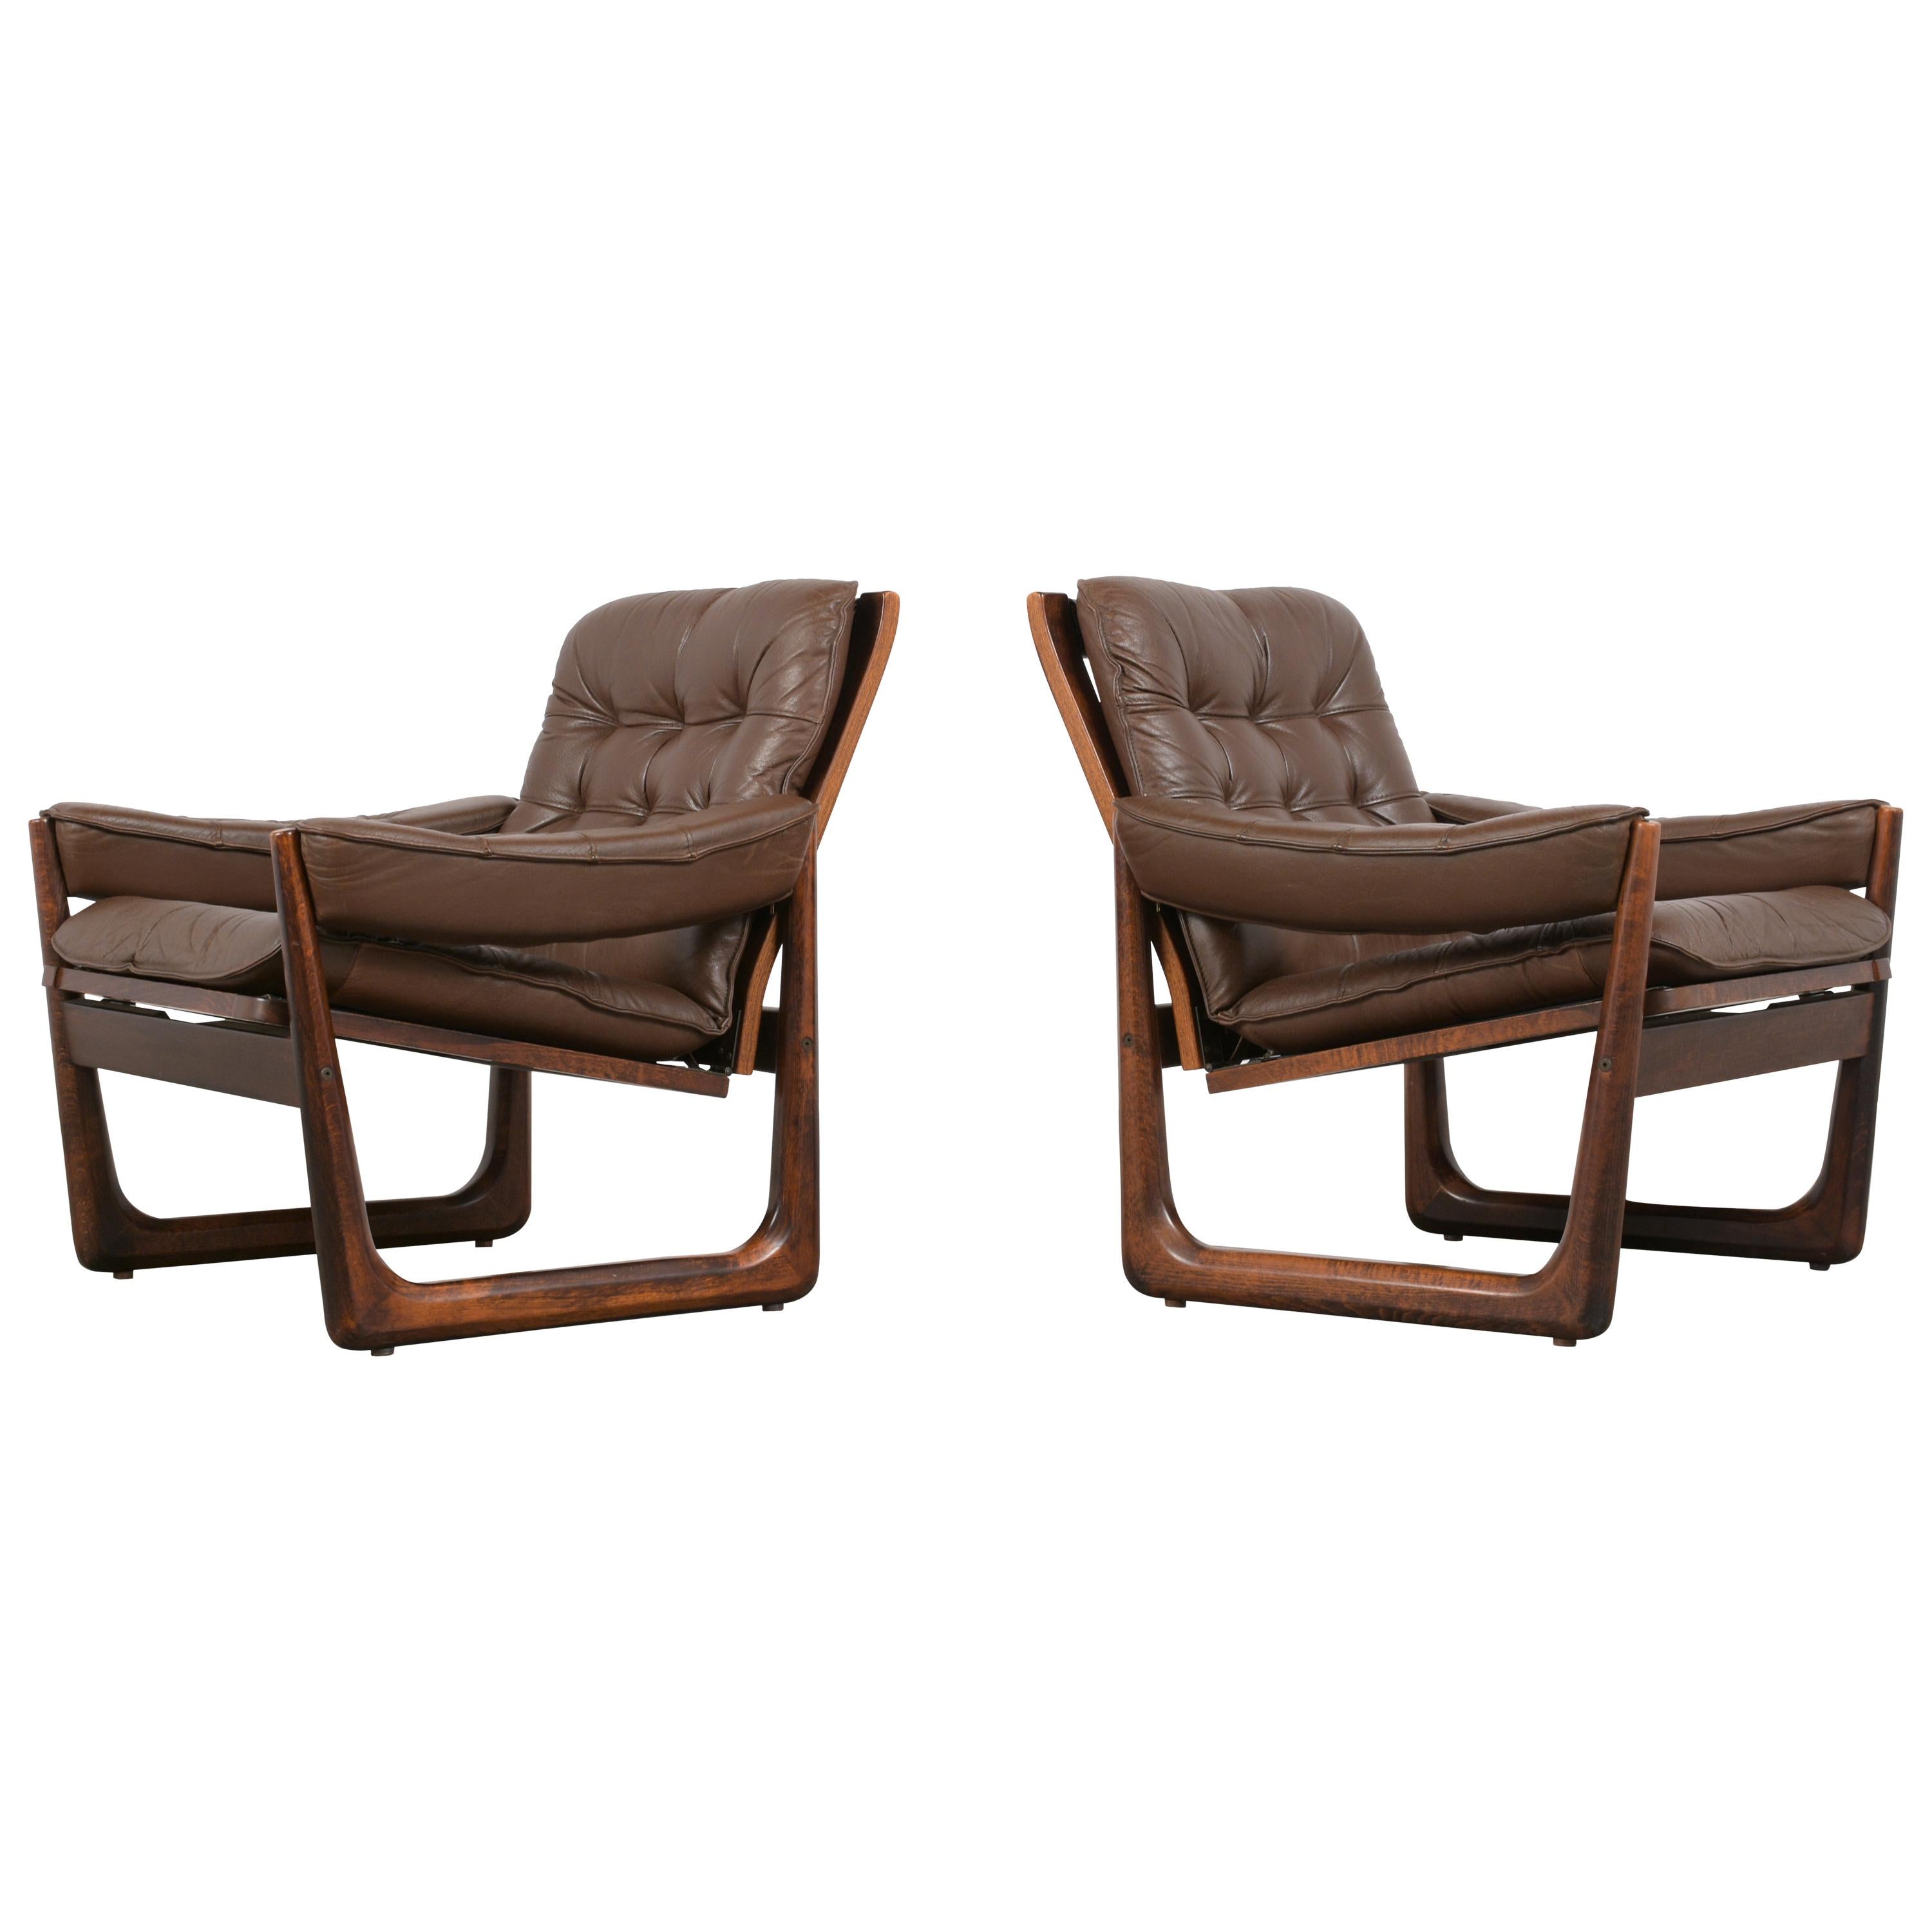 Pair of Mid Century Leather Tufted Lounge Chairs